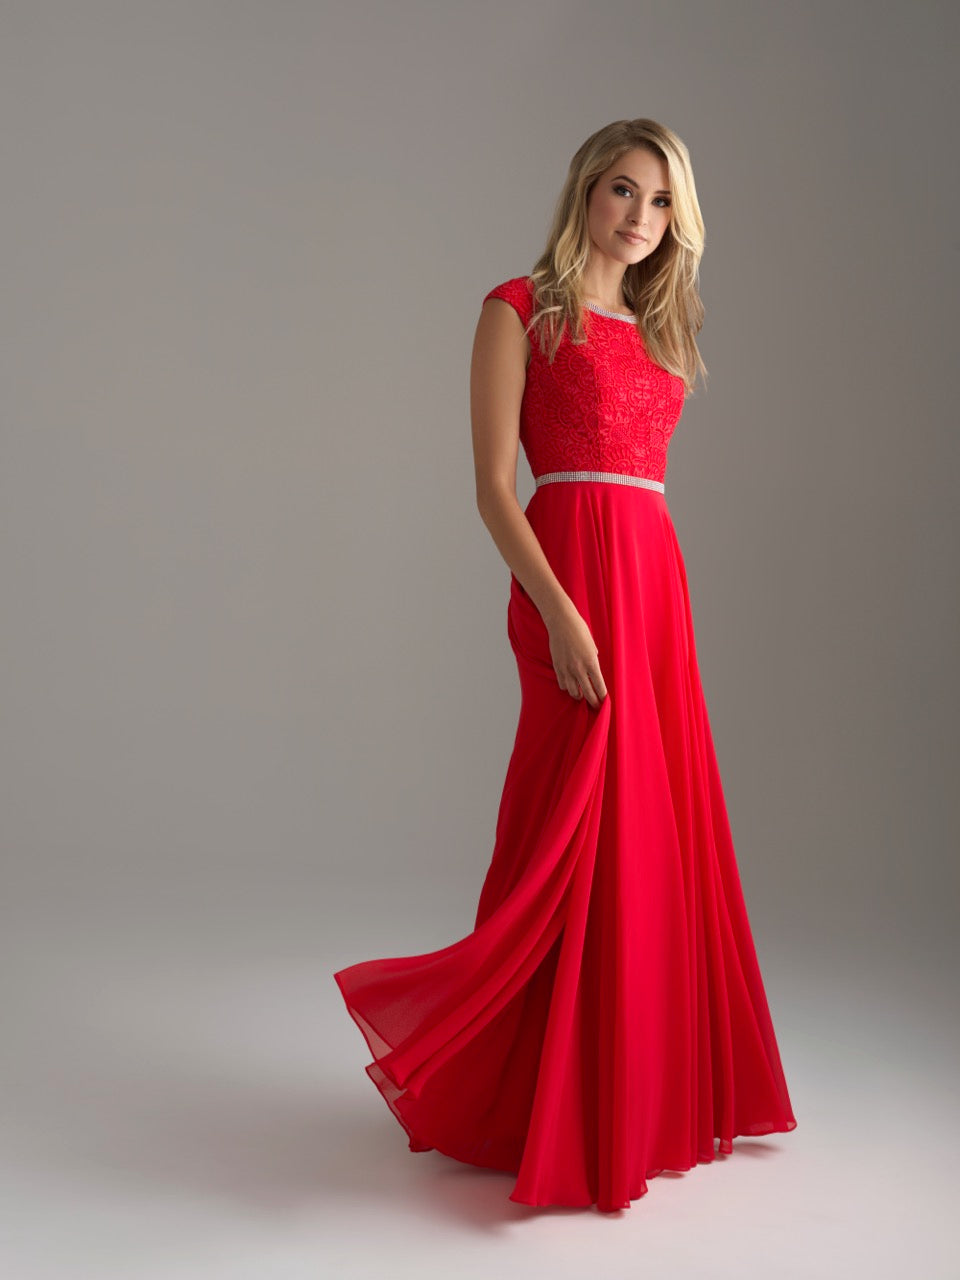 Madison James 18-802M Red modest prom dress A-Line winter formal cap sleeves cheap Mormon Prom conservative